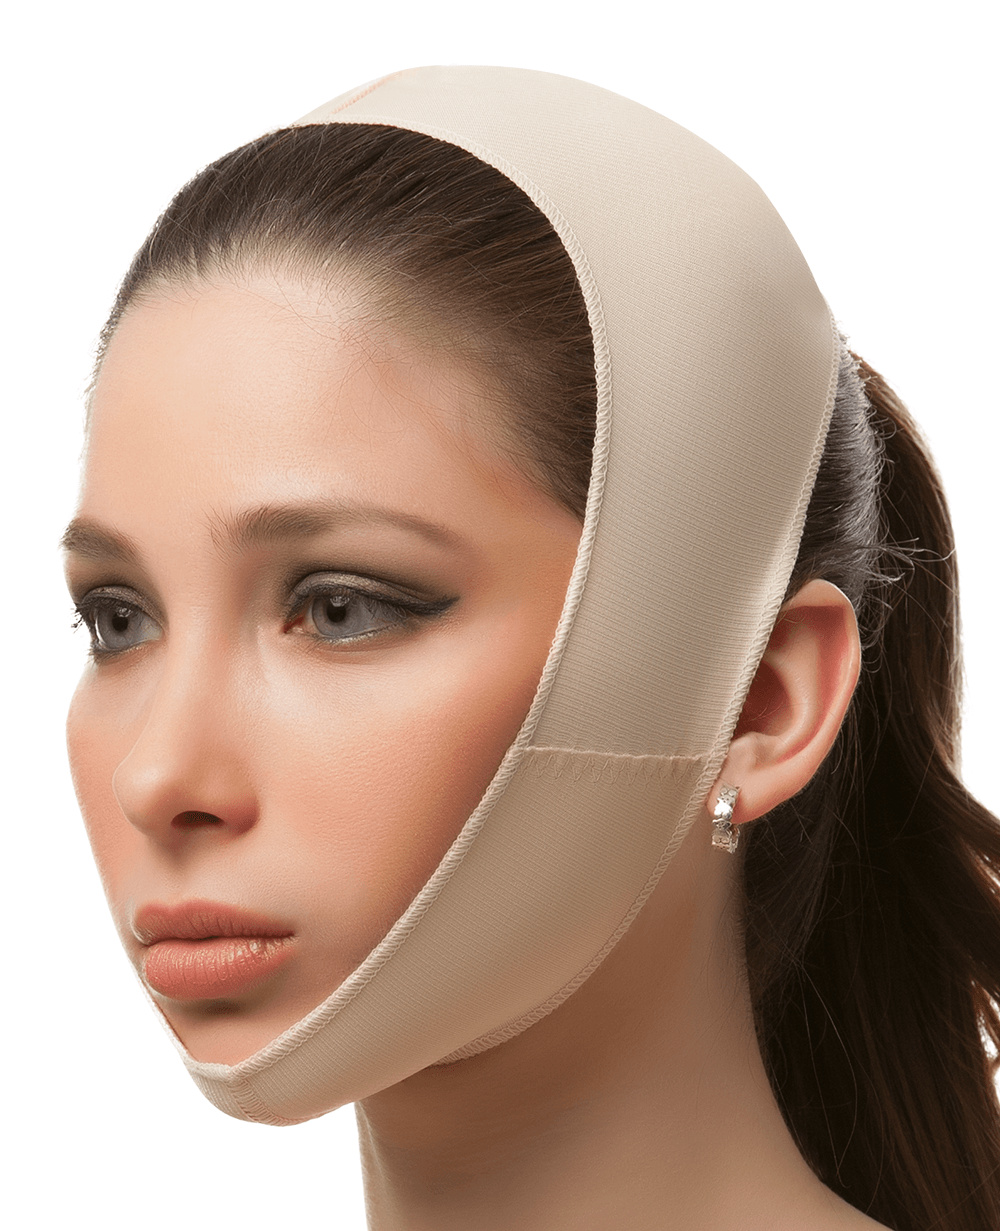 Isavela Compression Facial Garments - Unisex - JD Healthcare Group